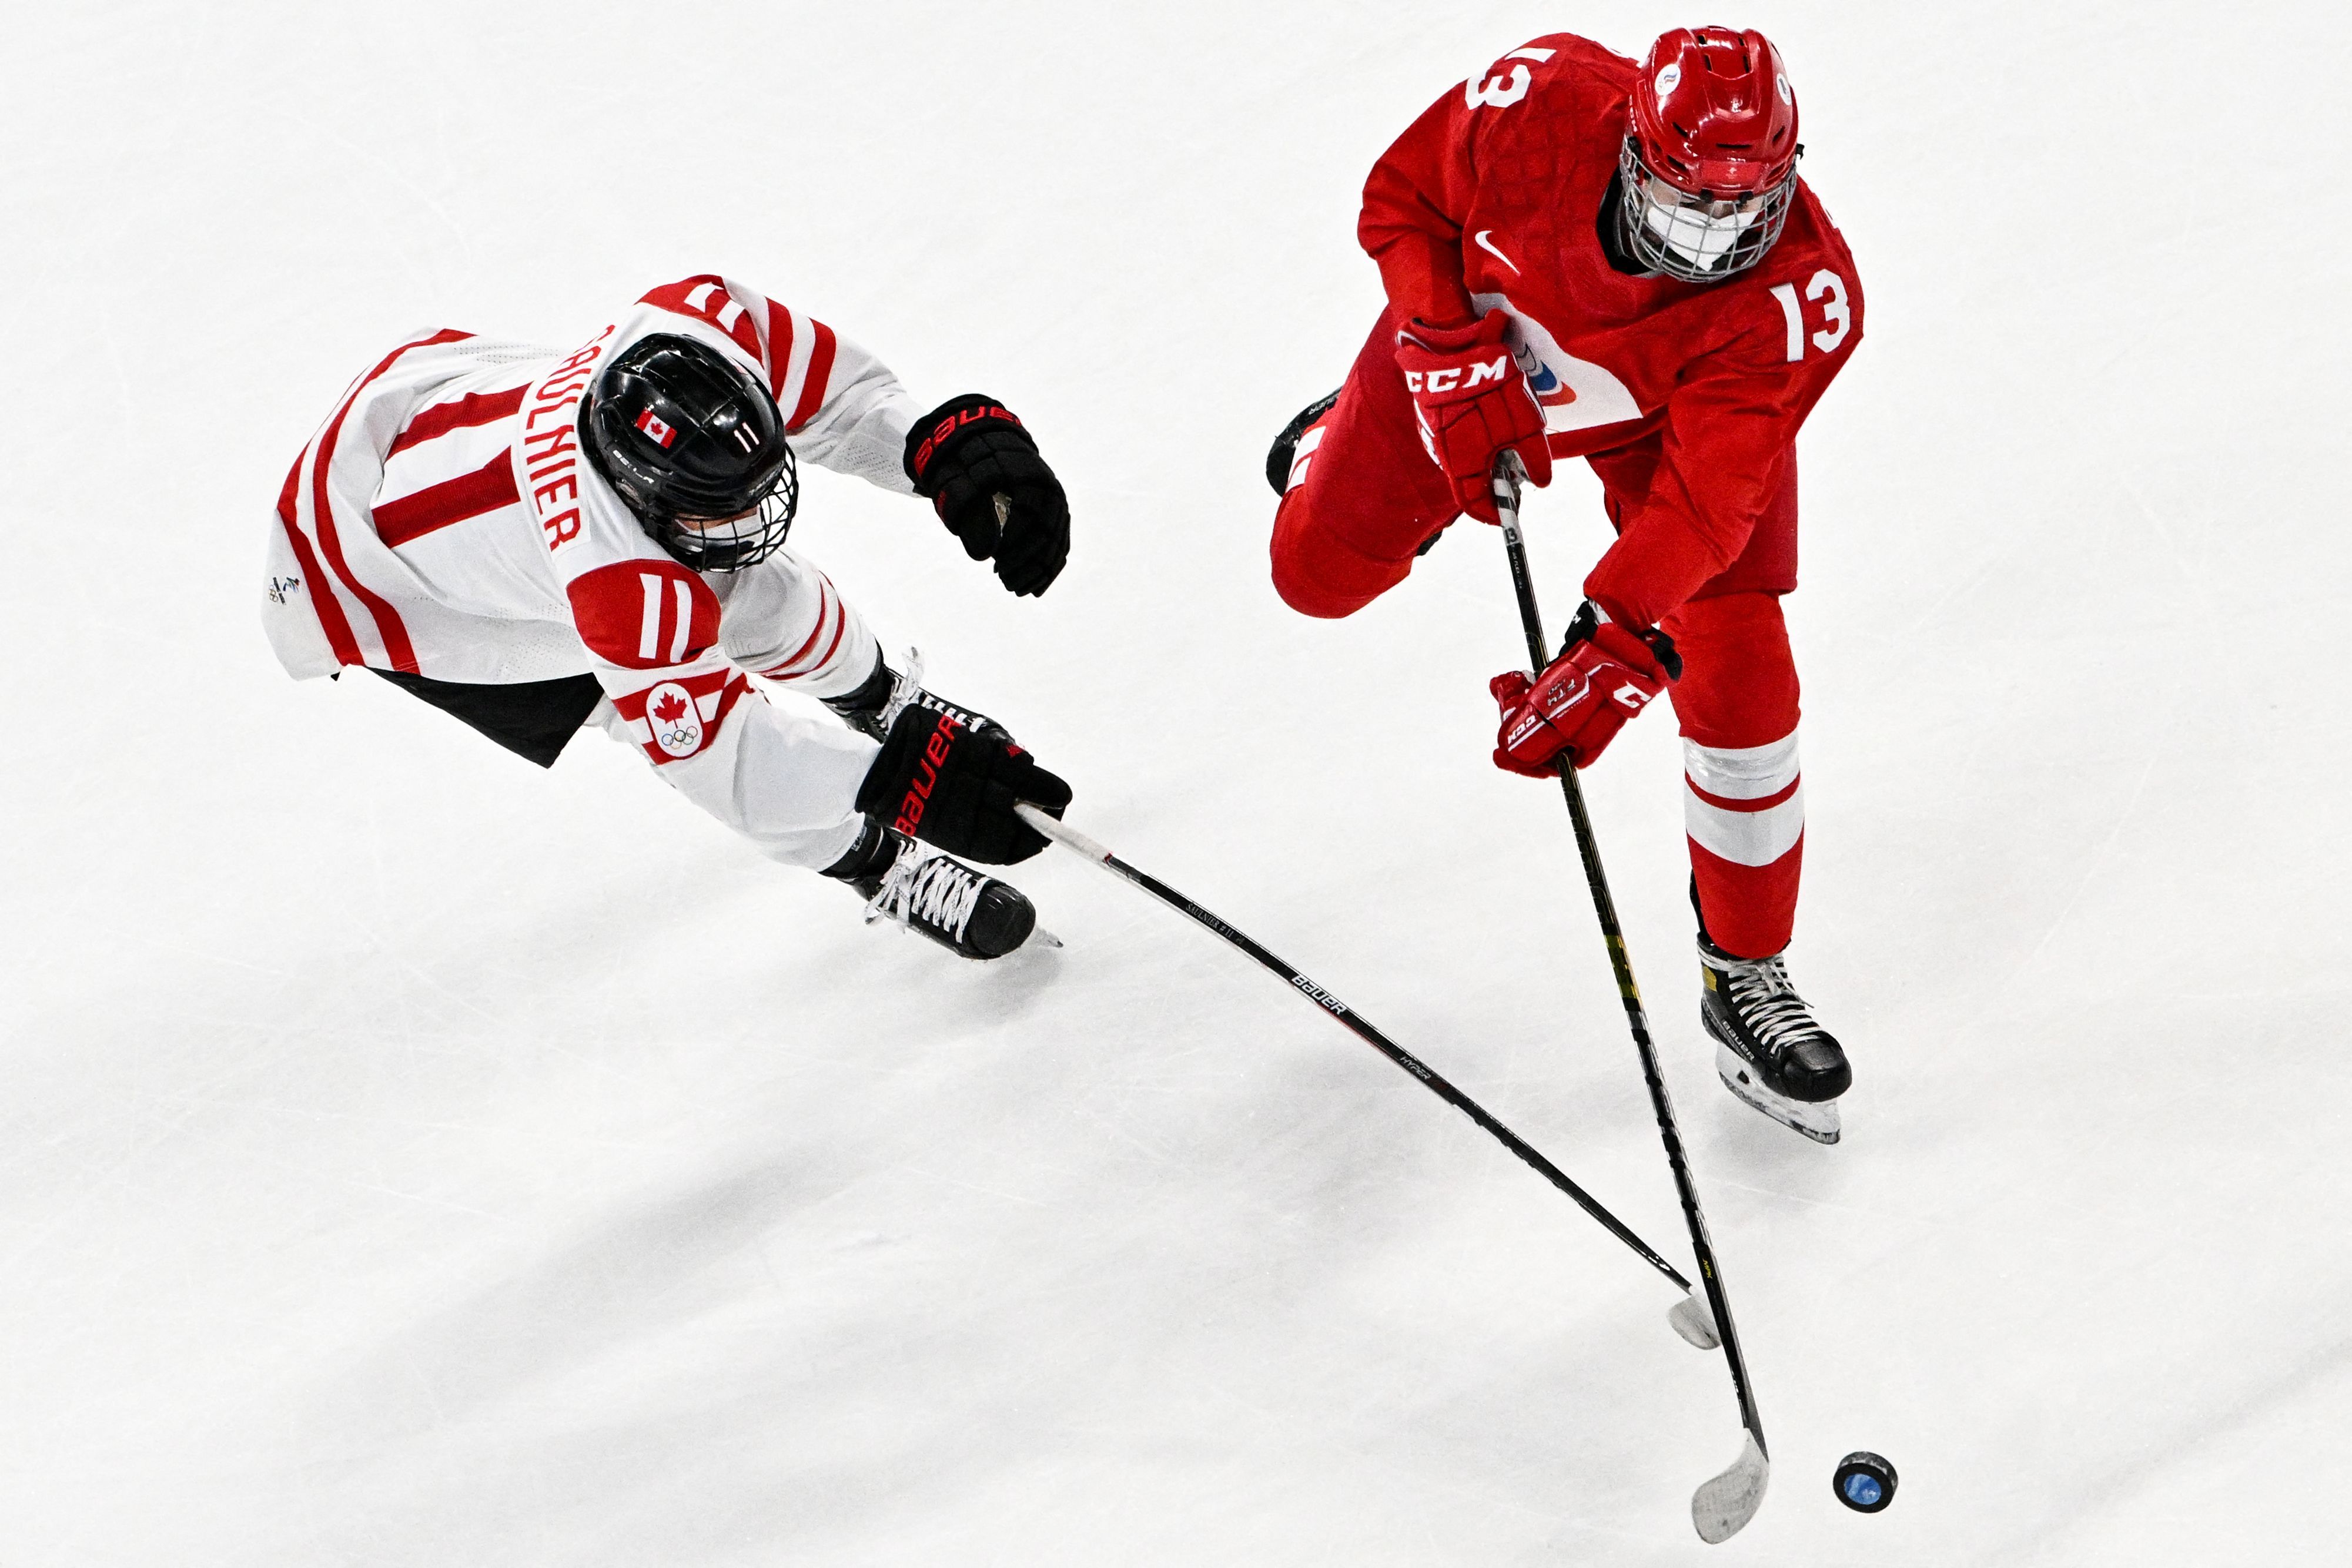 Canada's Jillian Saulnier and Russian Olympic Commitee's Nina Pirogova vie for the puck during the women's preliminary round group A match of the Beijing 2022 Winter Olympic Games